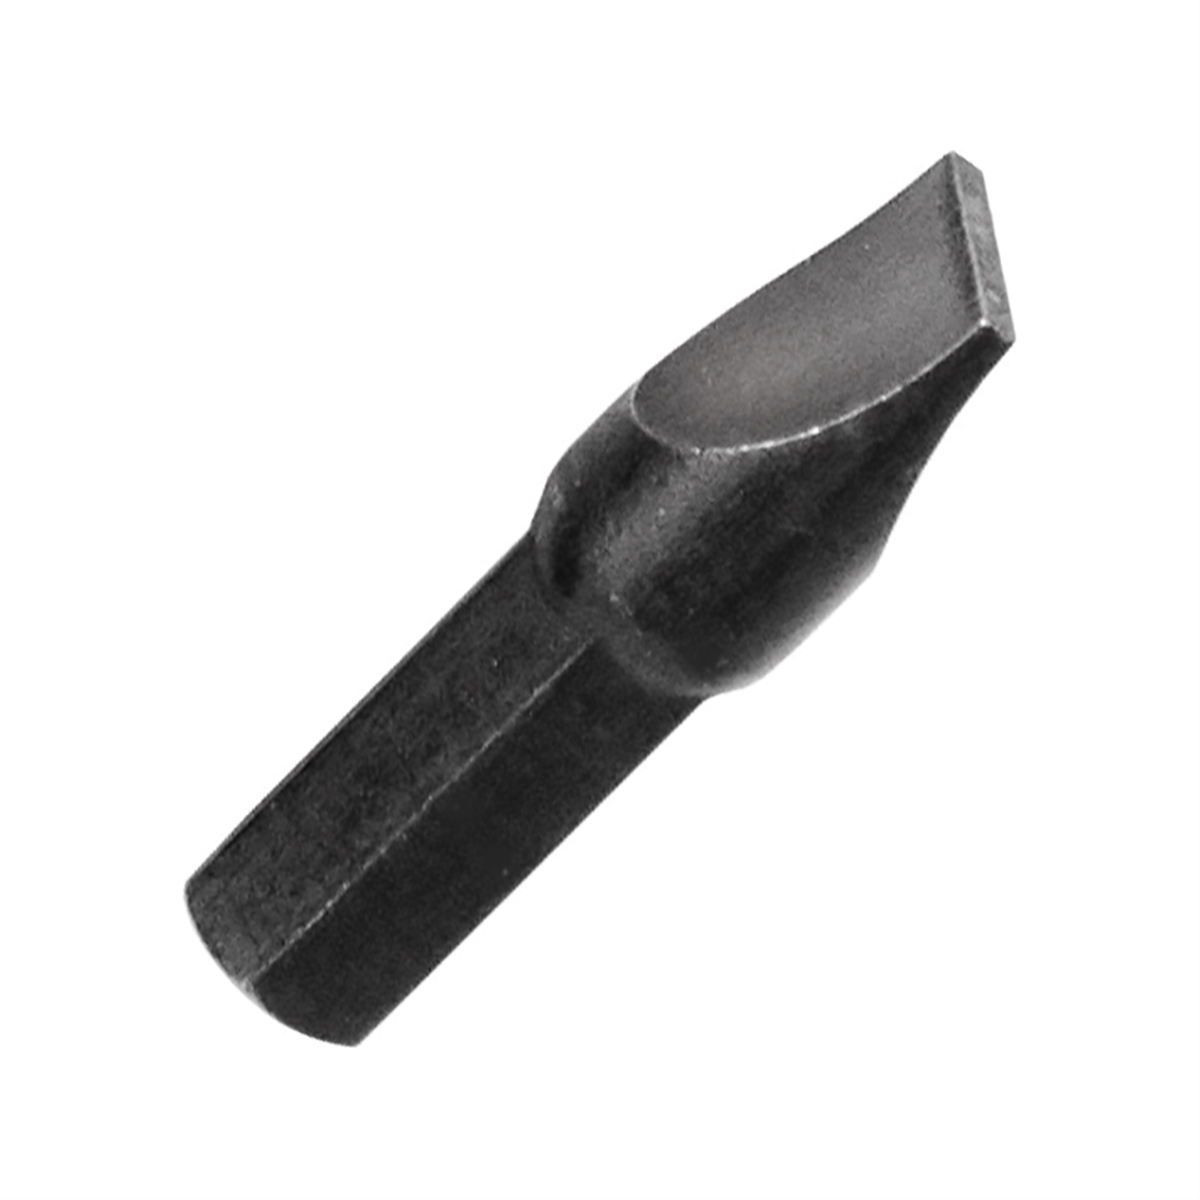 Screwdriver Bit - Large Slotted - 5/16 In Shank